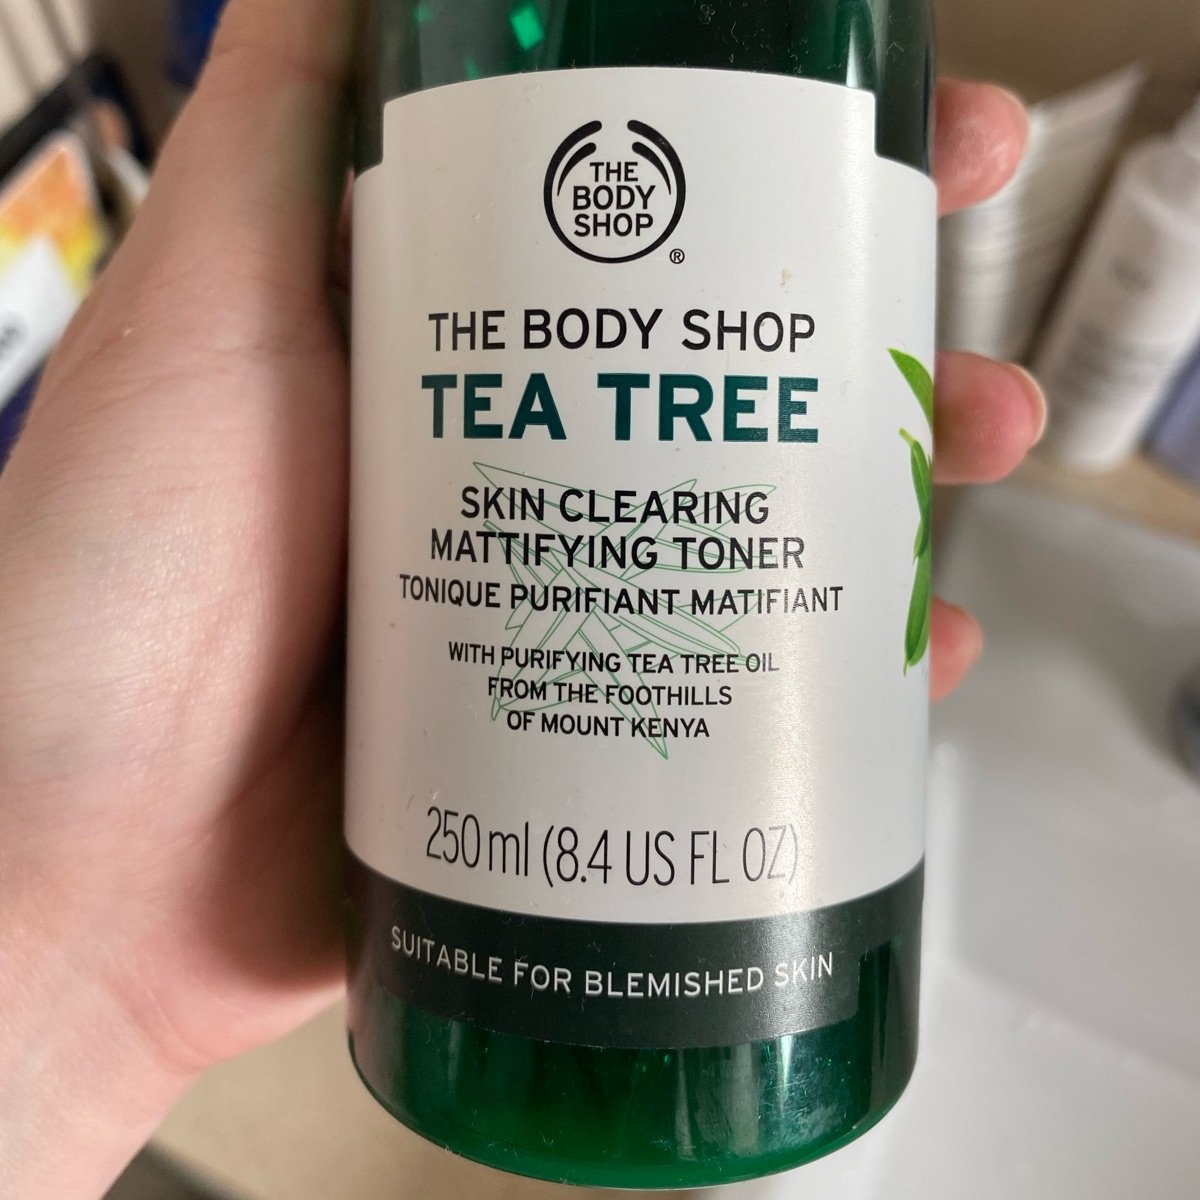 The Body Shop Tea Tree Skin Clearing Mattifying Toner Review | abillion